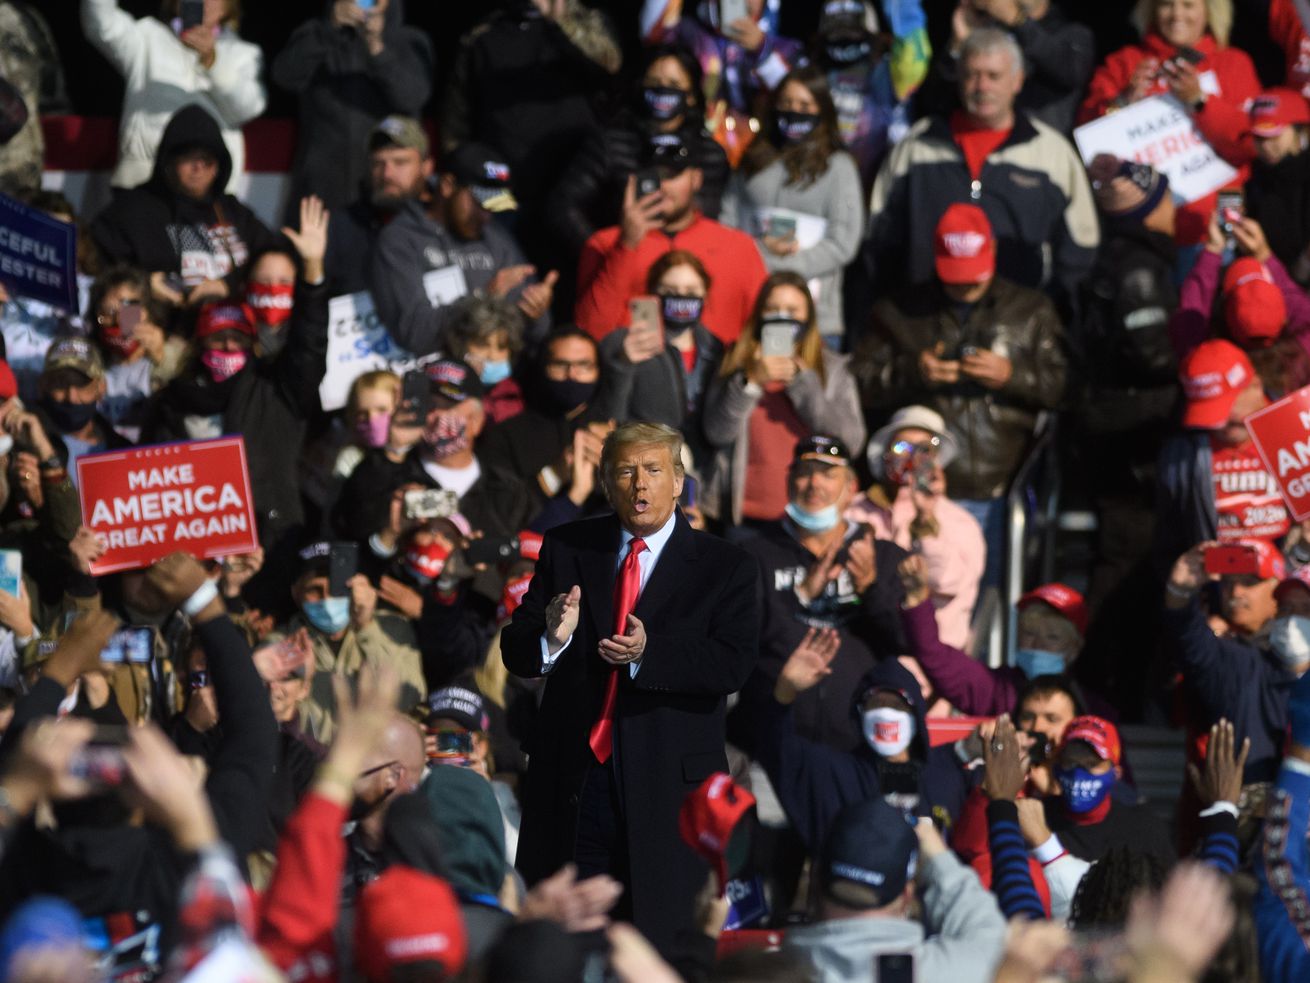 Trump, not wearing a face mask, standing in the middle of a crowd at a campaign rally.